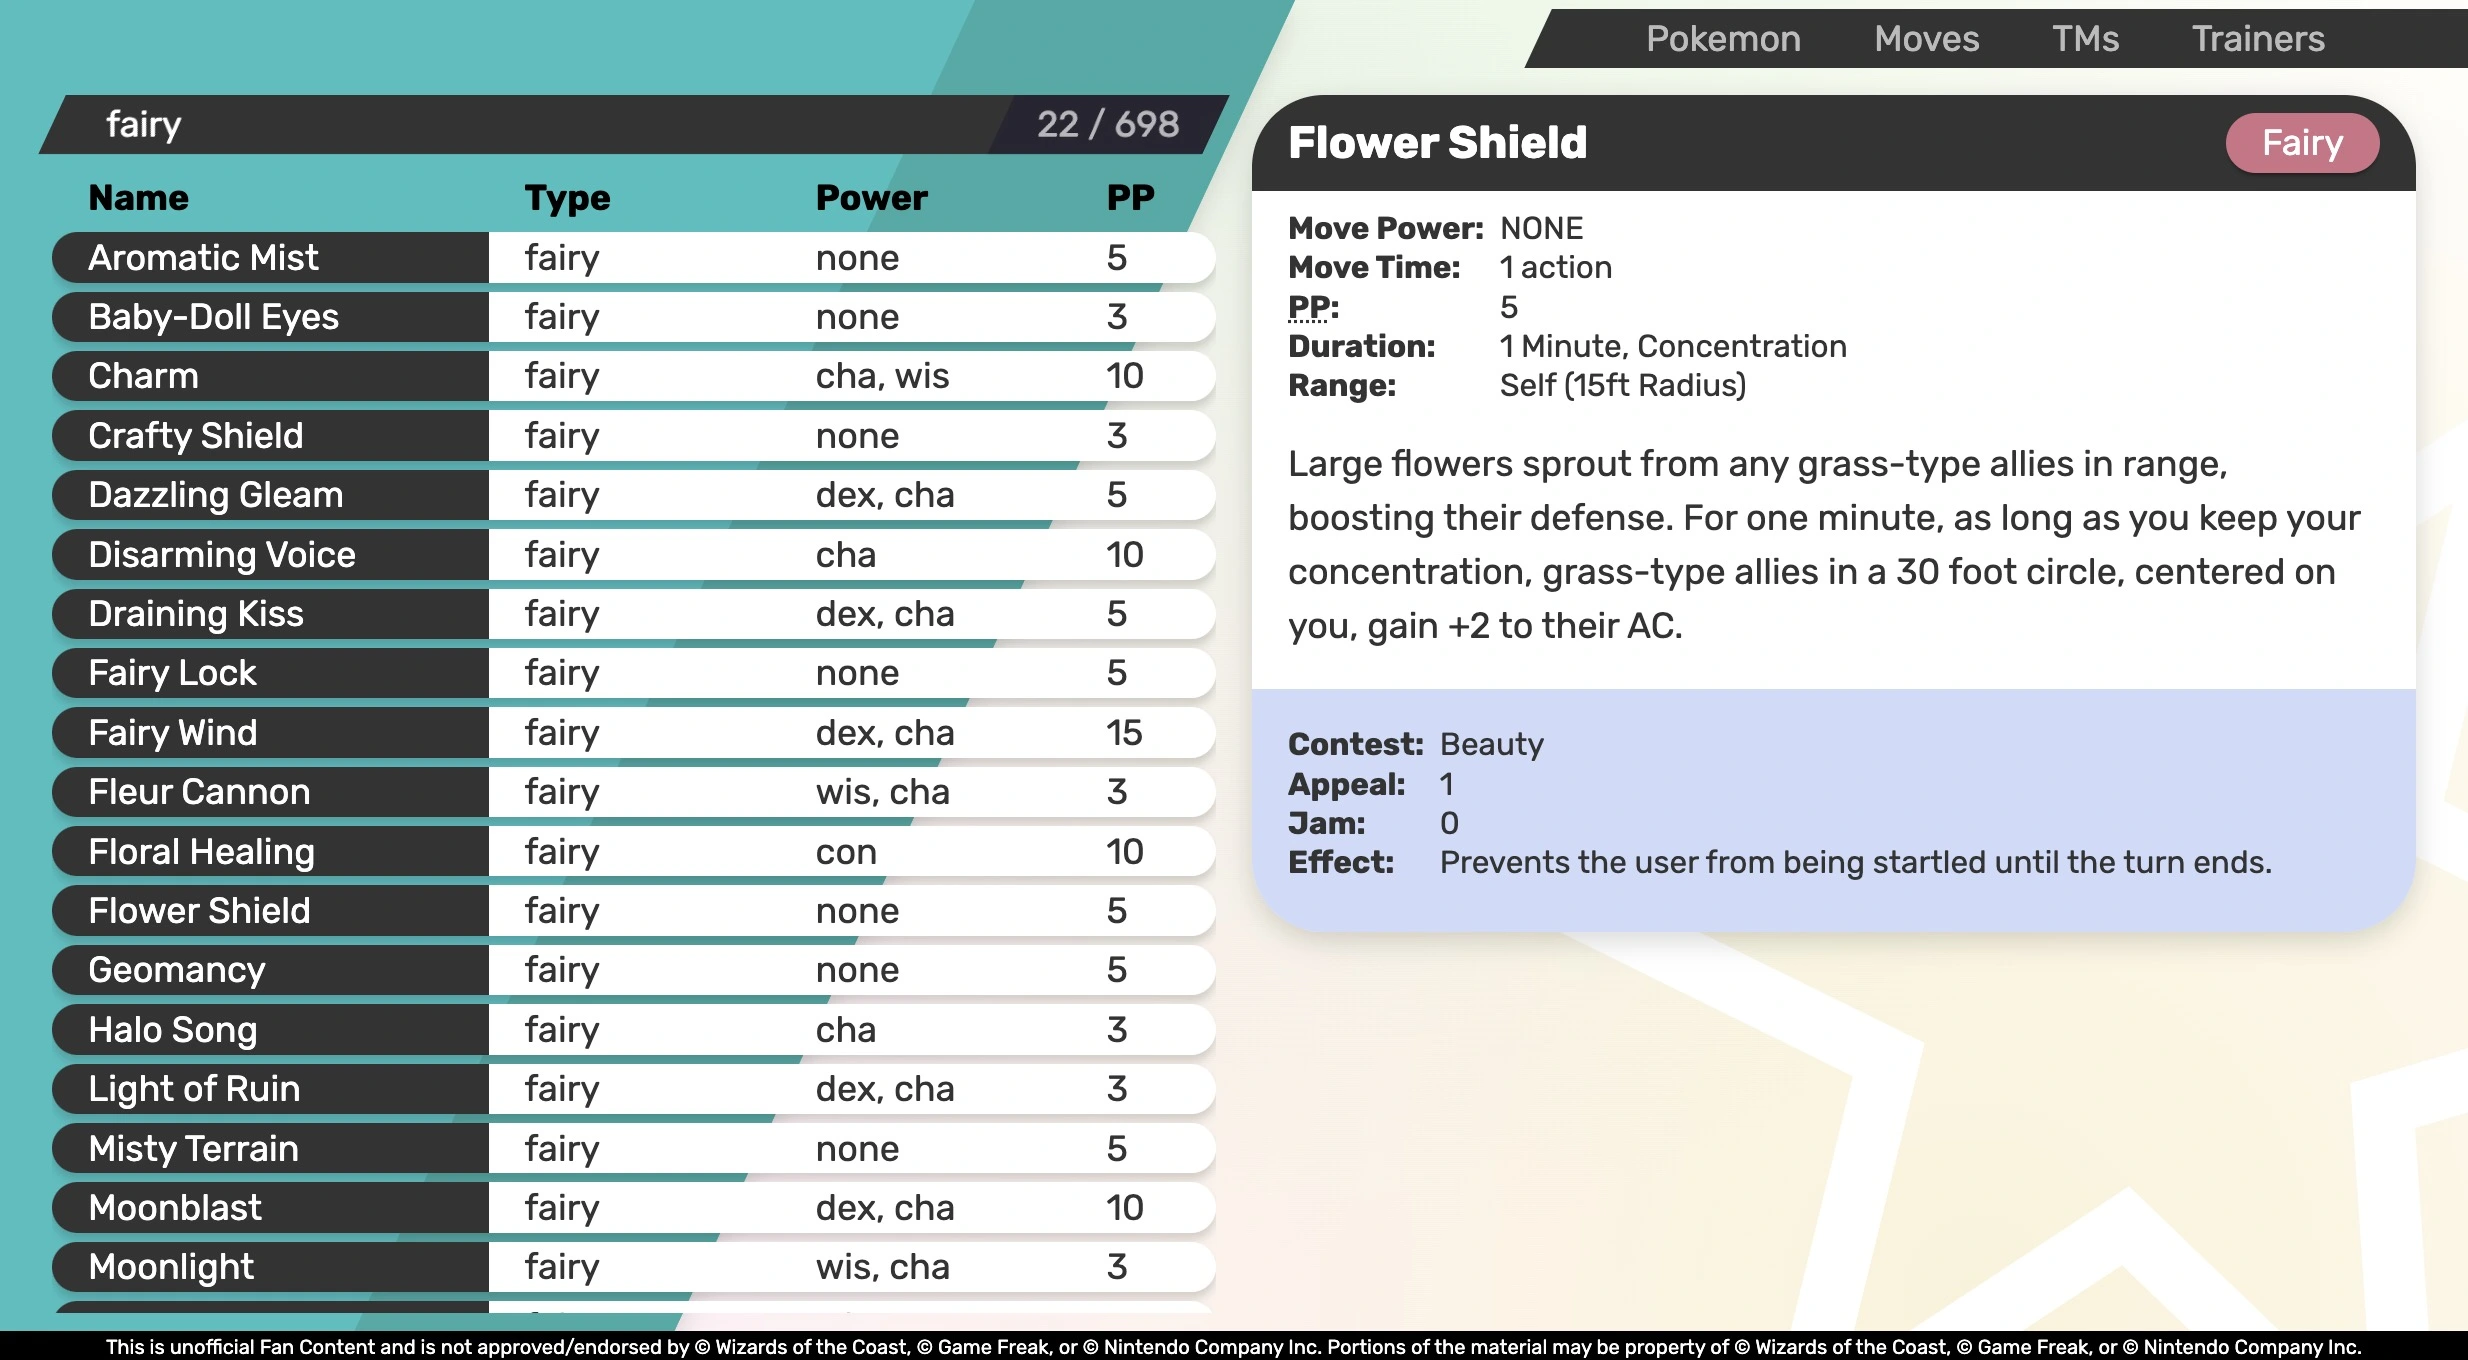 The filter field says 'fairy', with the list showing 22 matching moves.